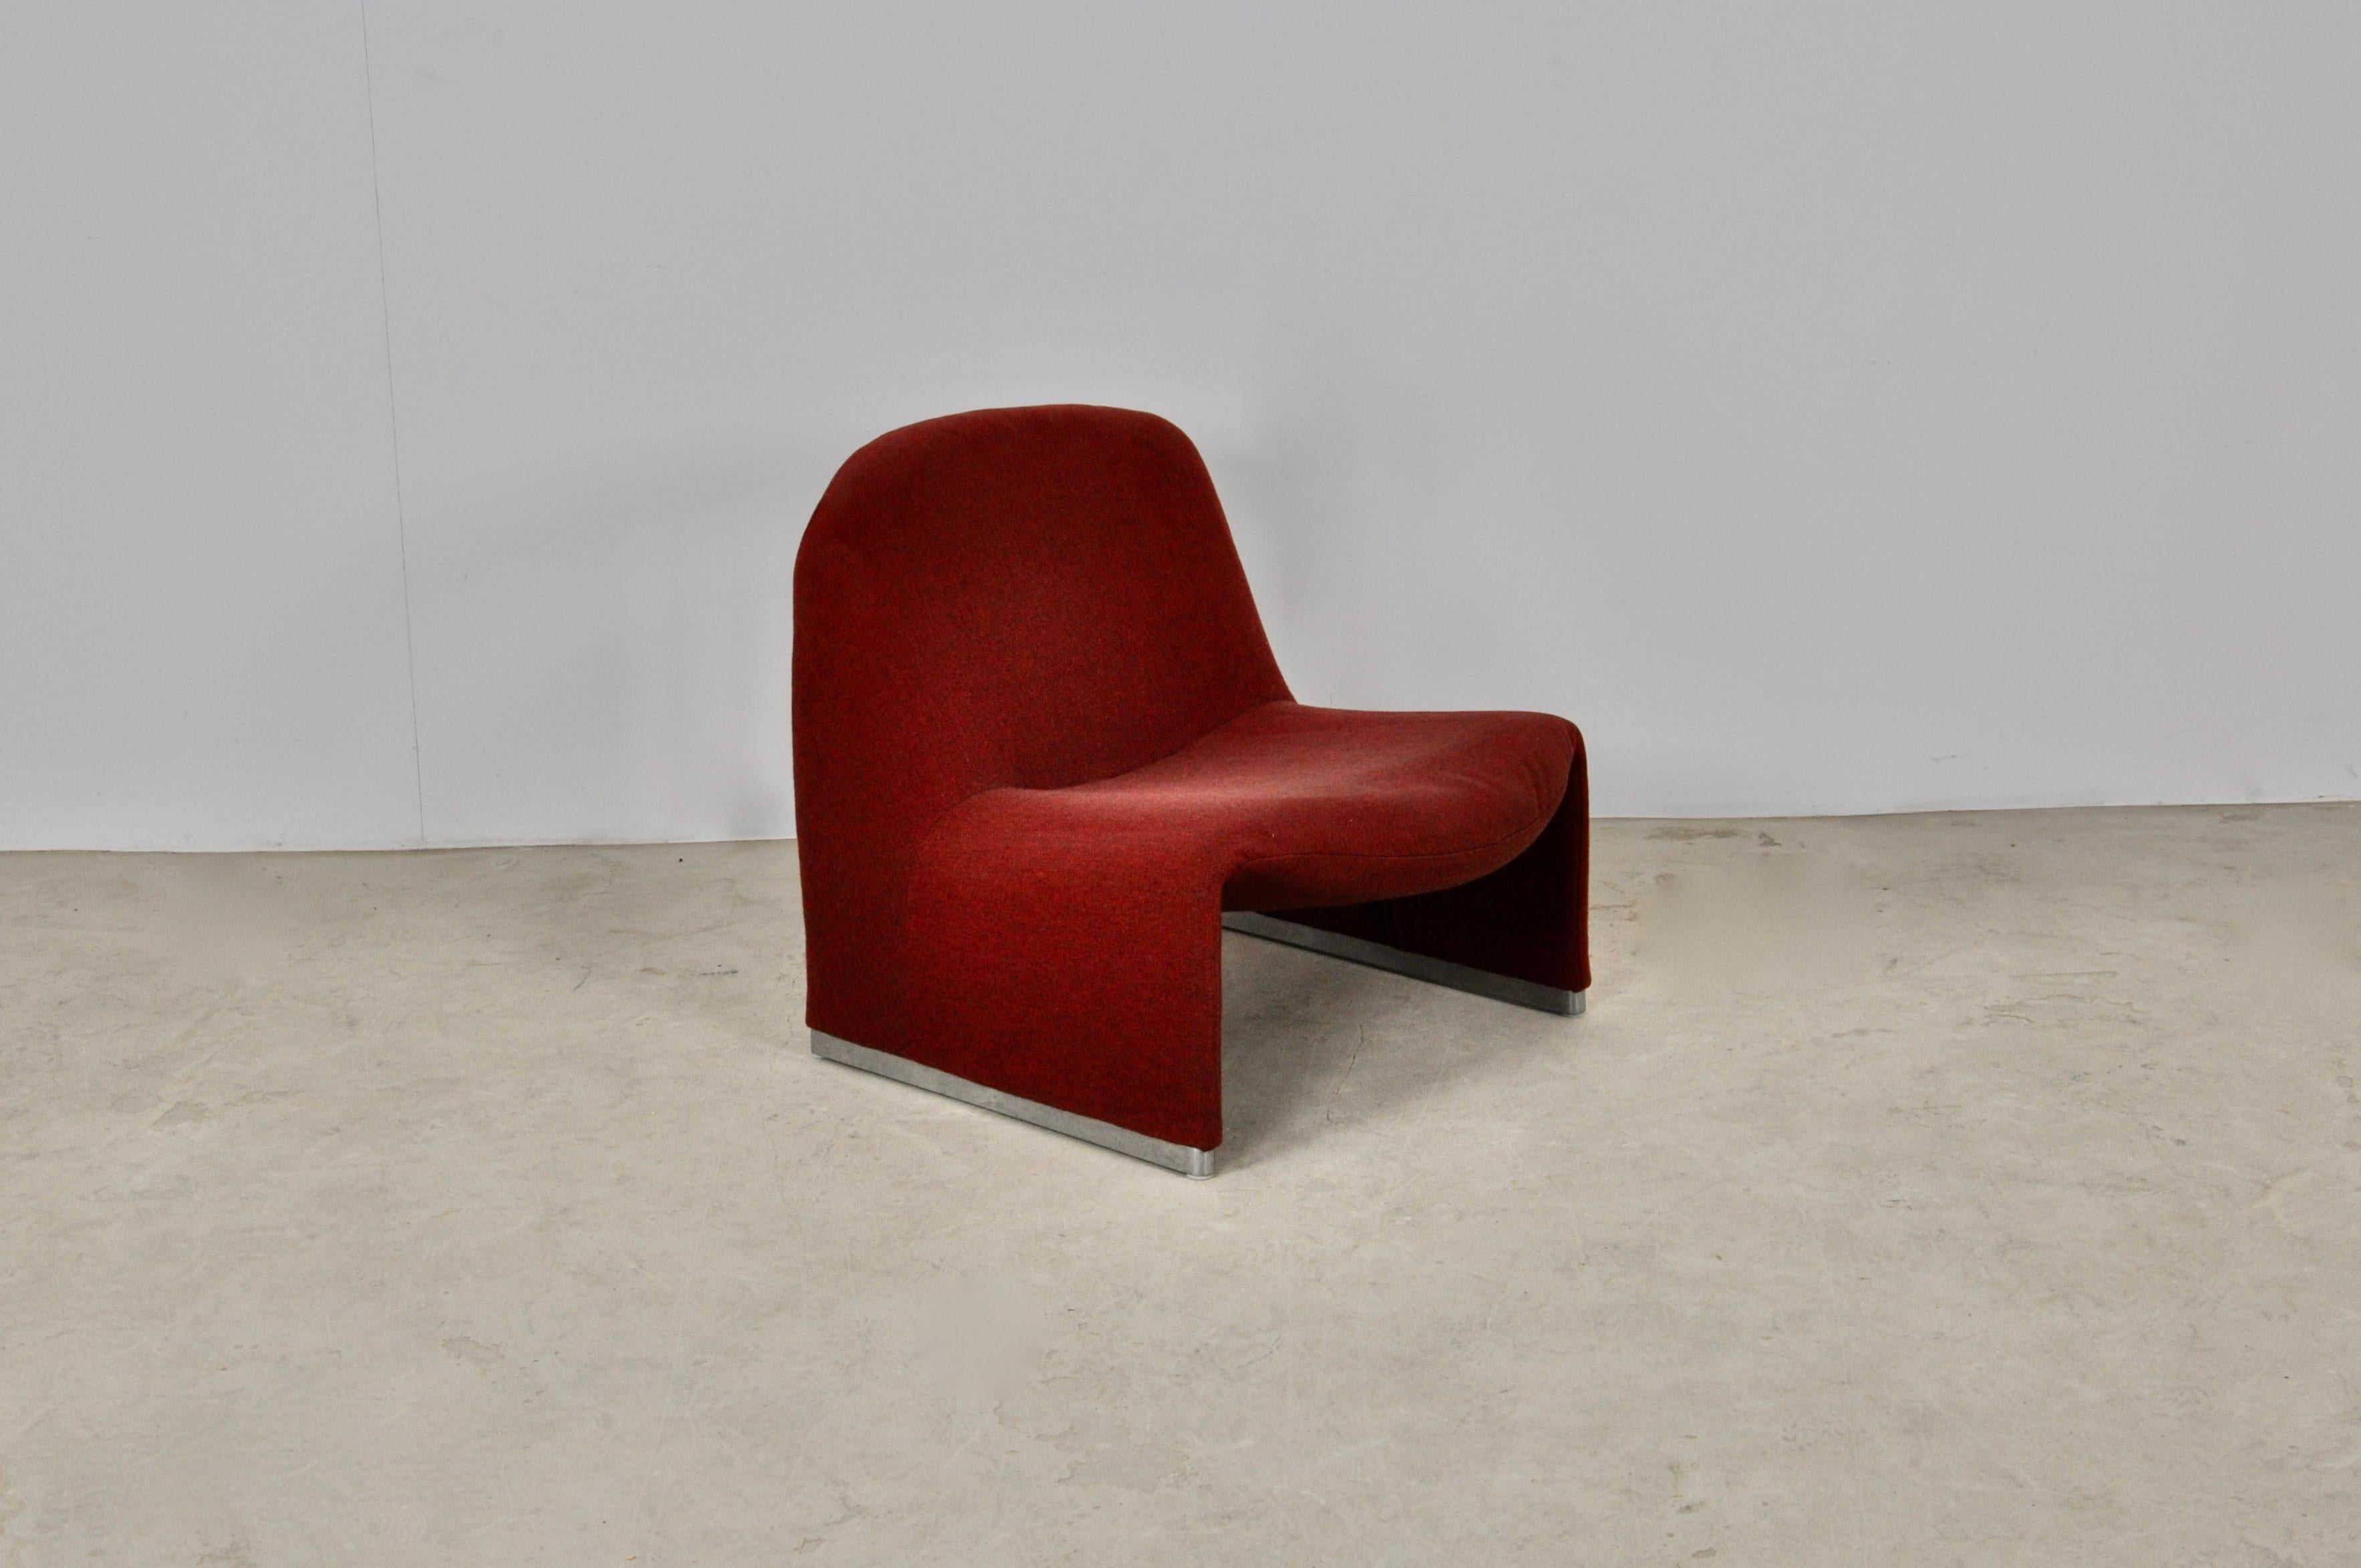 Armchair in red fabric. Measure: Seat height: 35cm. Small hole on the seat (see picture).